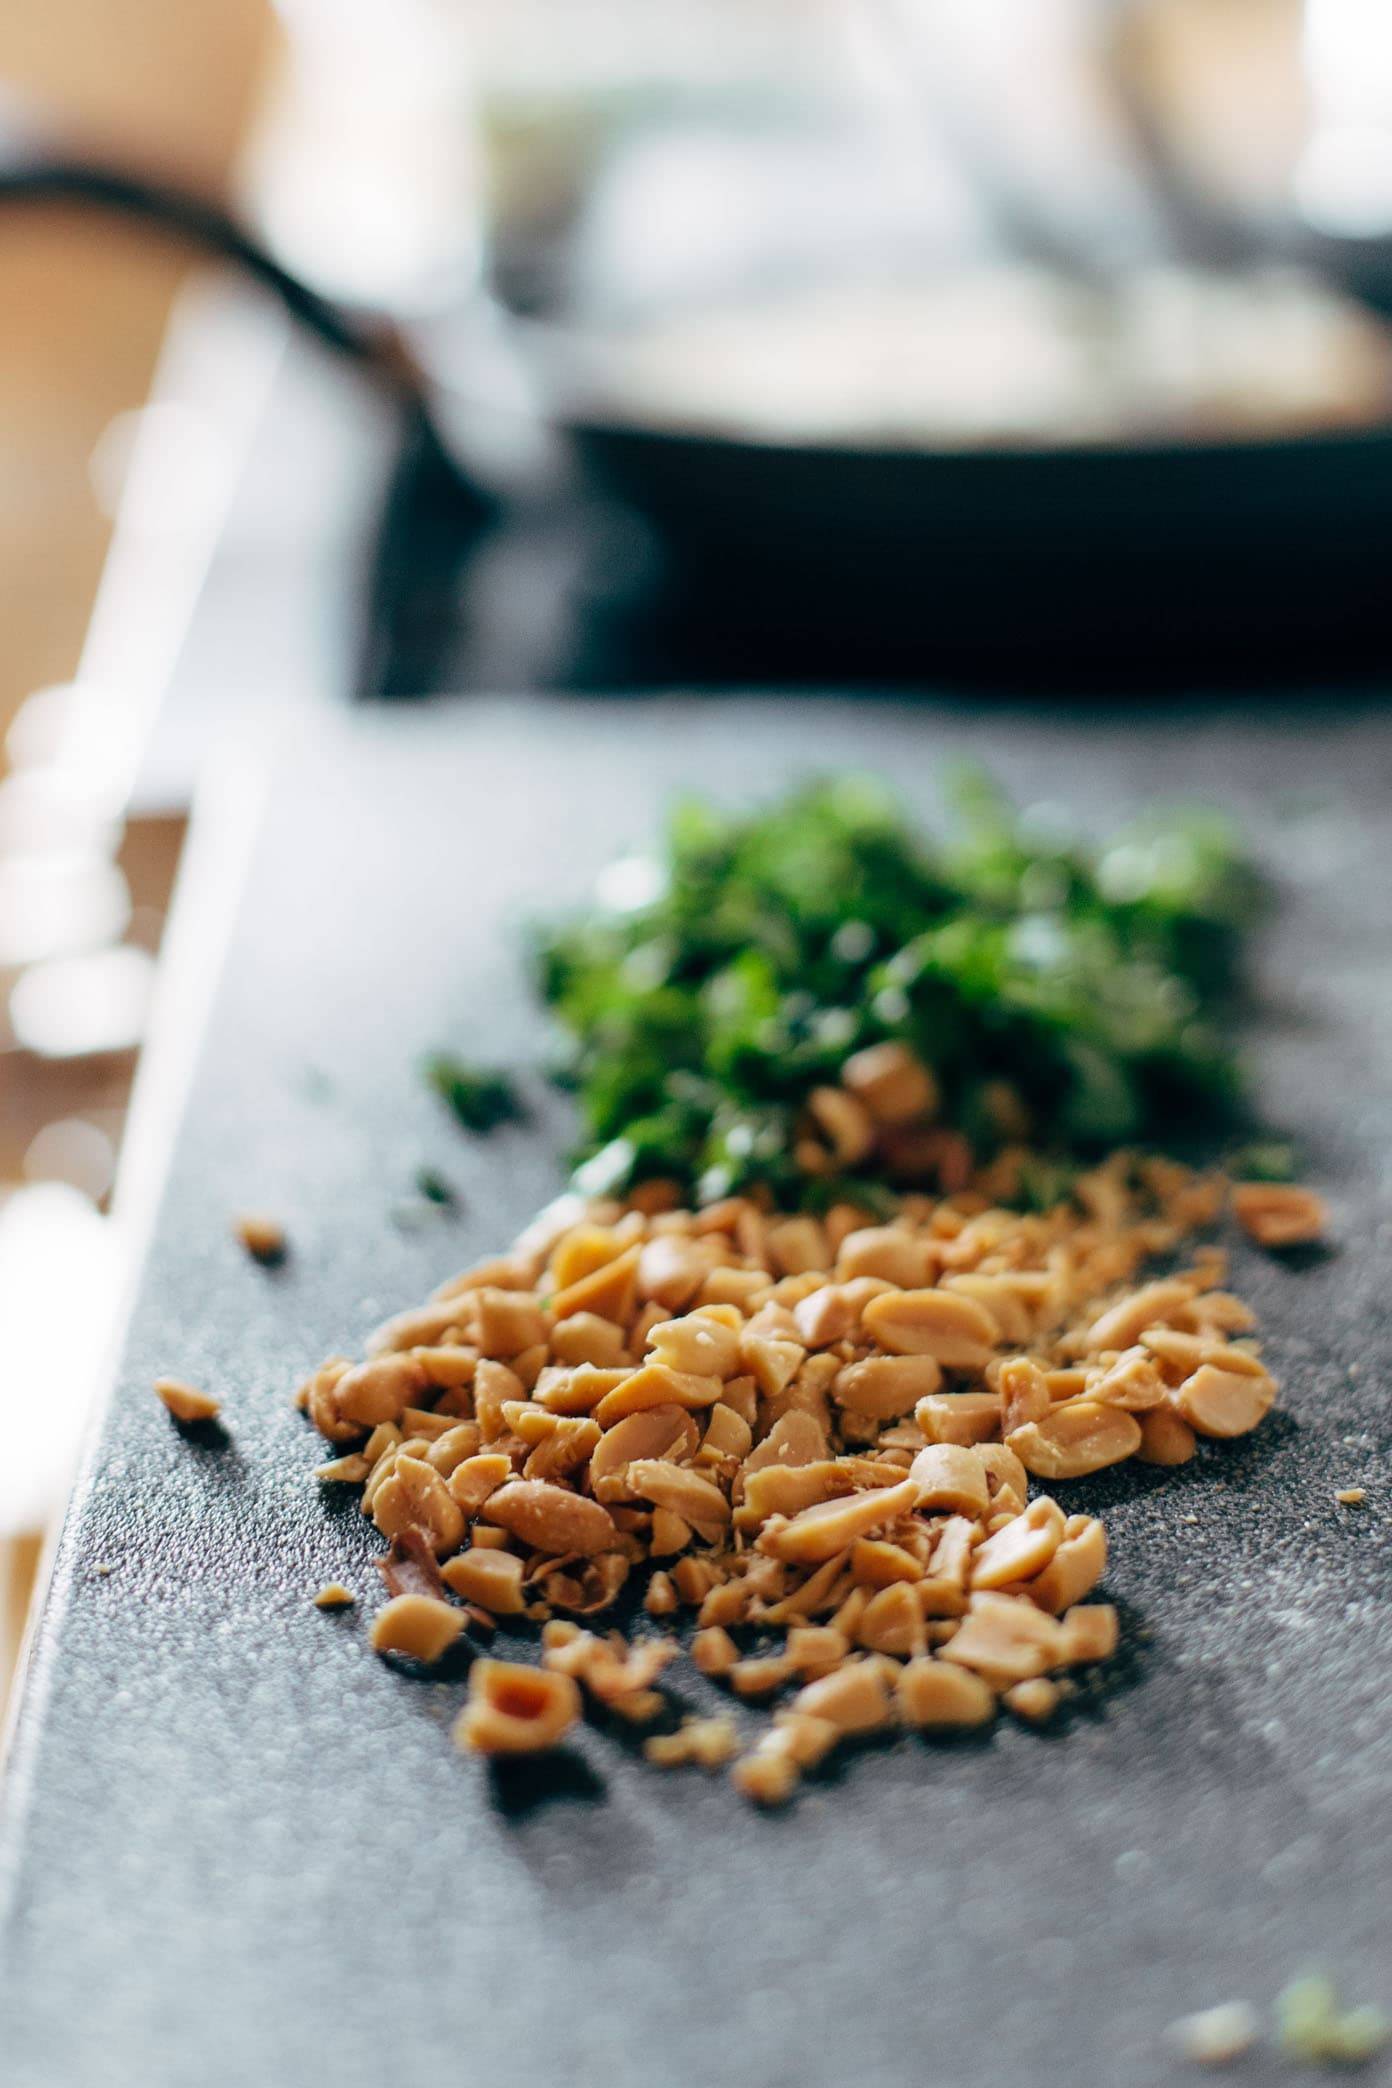 Chopped nuts on a cutting board with herbs.